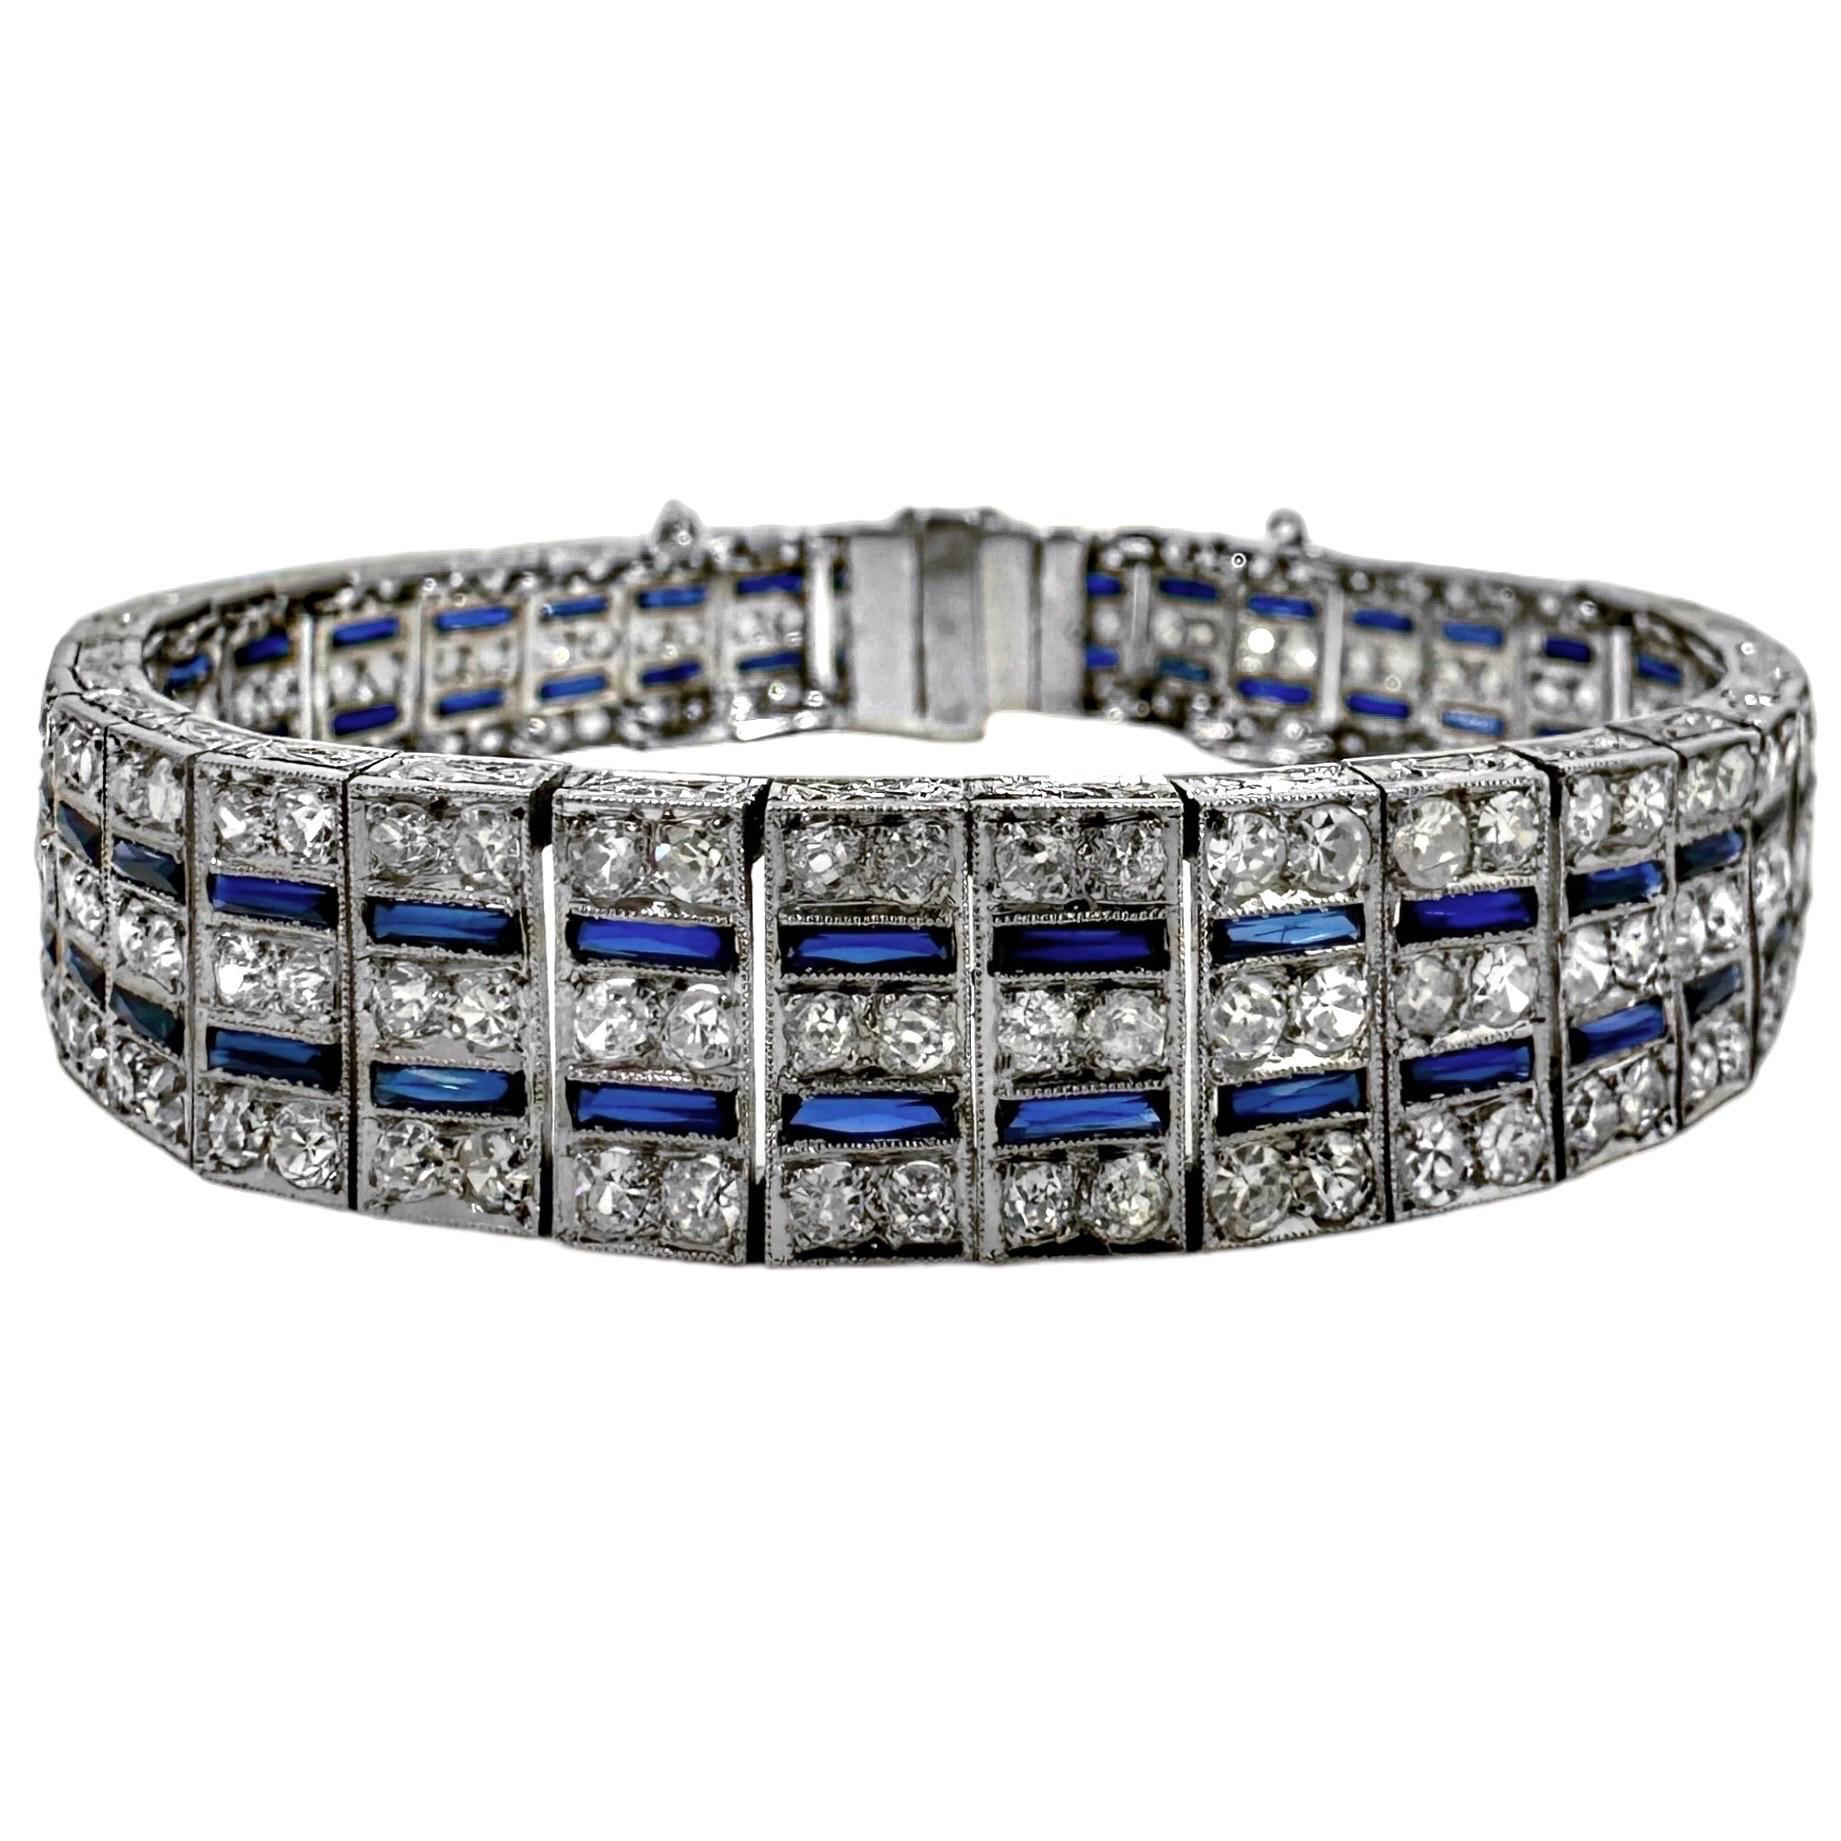 This original Art-Deco period 1/2 inch wide platinum bracelet is set with a total of 210 antique single cut diamonds and with two lines of verneuil  process synthetic blue sapphires*. Total approximate diamond weight is  6.50ct and overall diamond